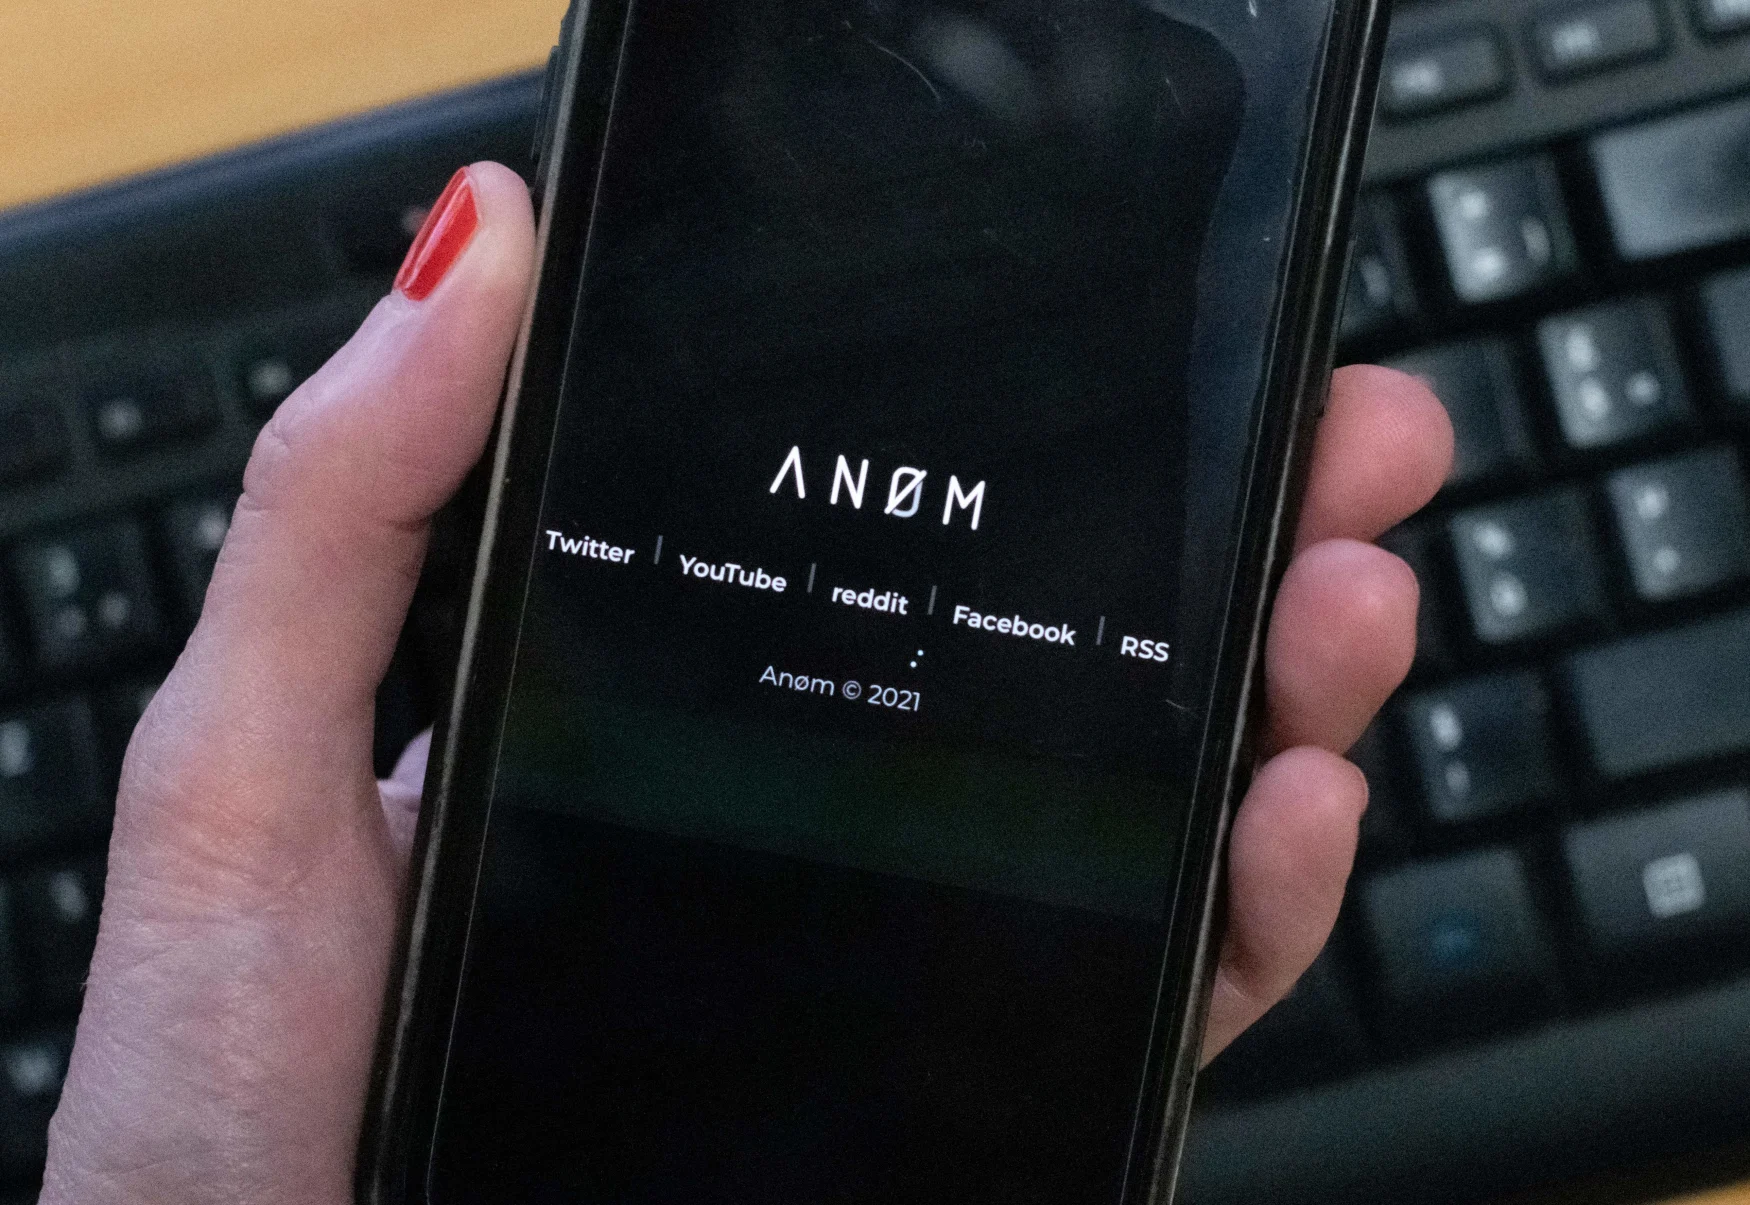 An illustration picture shows the ANoM logo displayed on the screen of an smartphone on june 8, 2021 in Paris. - Some 250 people were arrested in Sweden and Finland in the global sting on organised crime, authorities said on June 8, 2021, using phones planted by the US FBI, law enforcement officers were able to read the messages of global underworld figures in around 100 countries as they plotted drug deals, arms transfers and gangland hits on the compromised ANOM devices. (Photo by Olivier MORIN / AFP) (Photo by OLIVIER MORIN/AFP via Getty Images)